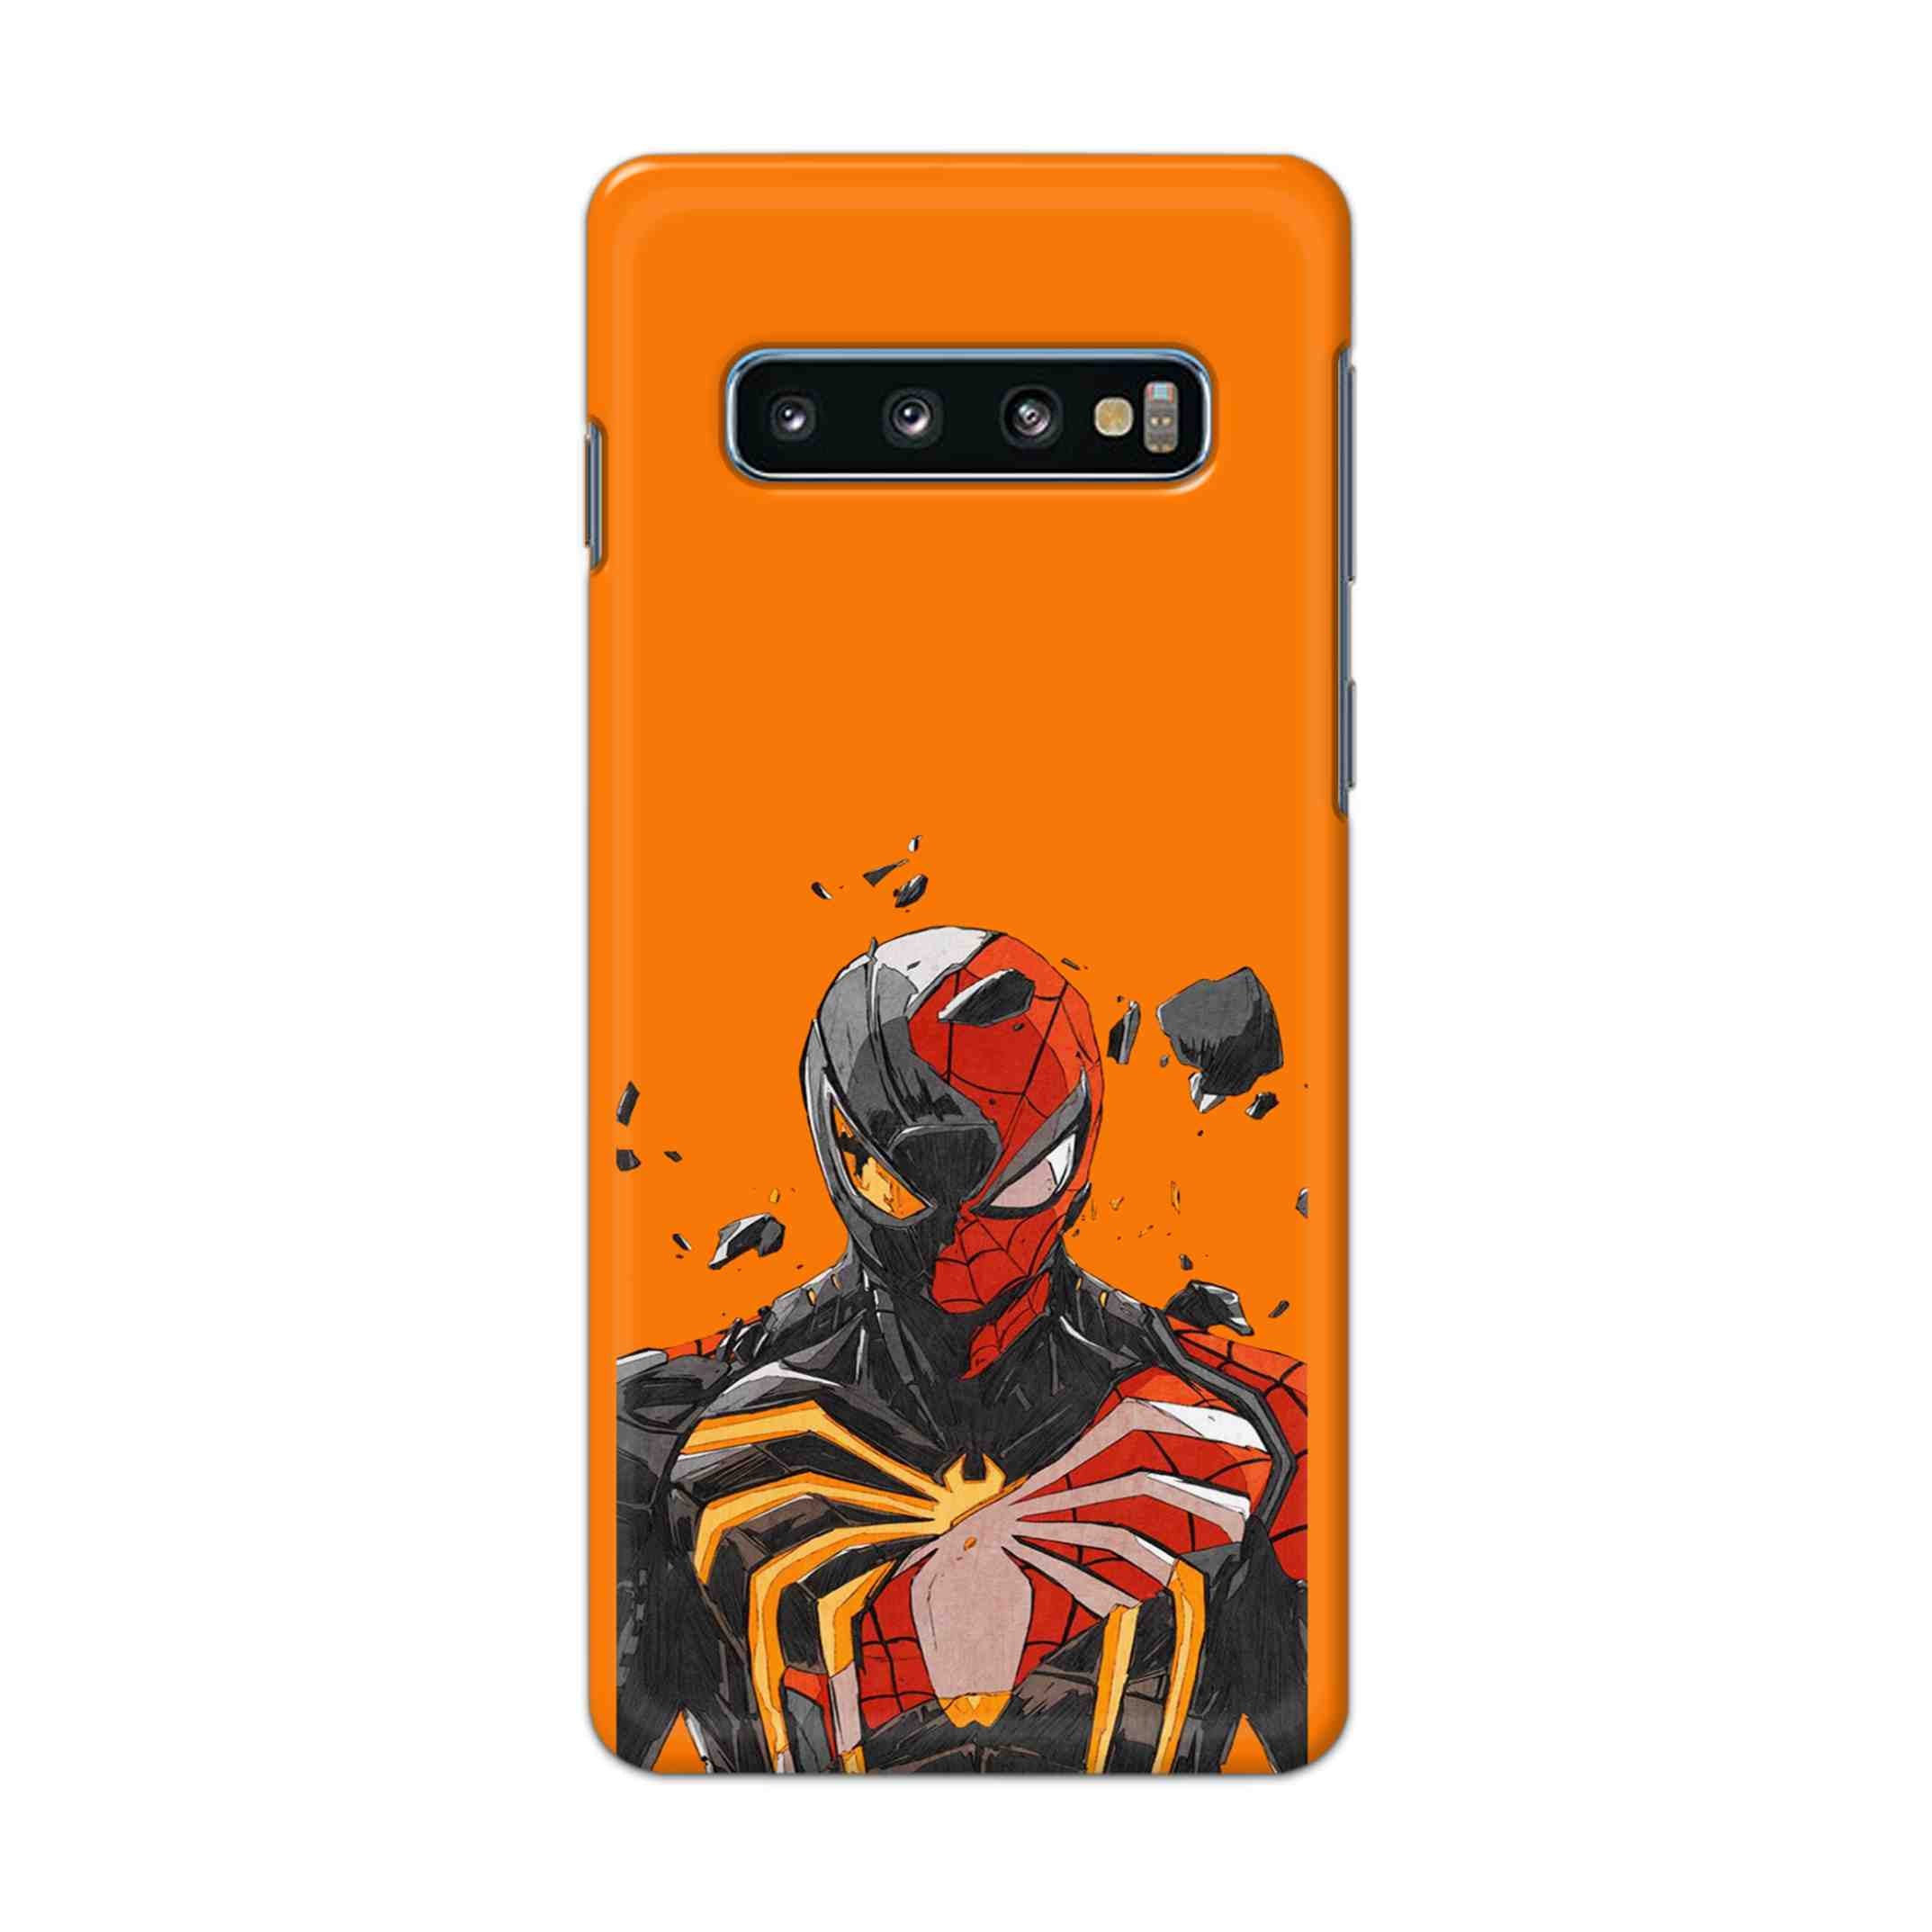 Buy Spiderman With Venom Hard Back Mobile Phone Case Cover For Samsung Galaxy S10 Plus Online